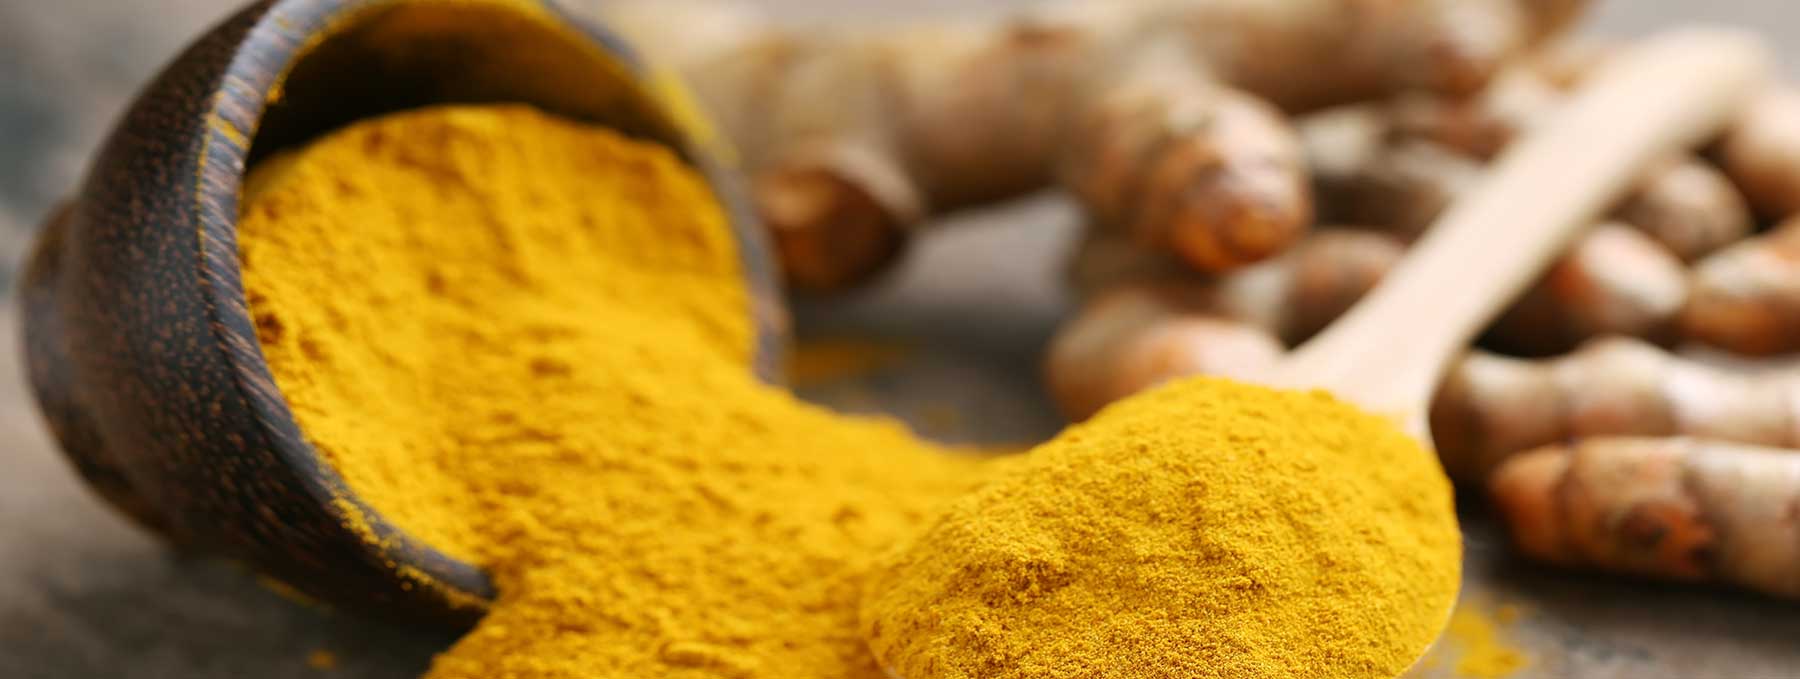 turmeric benefits for inflammation and cellular health 3